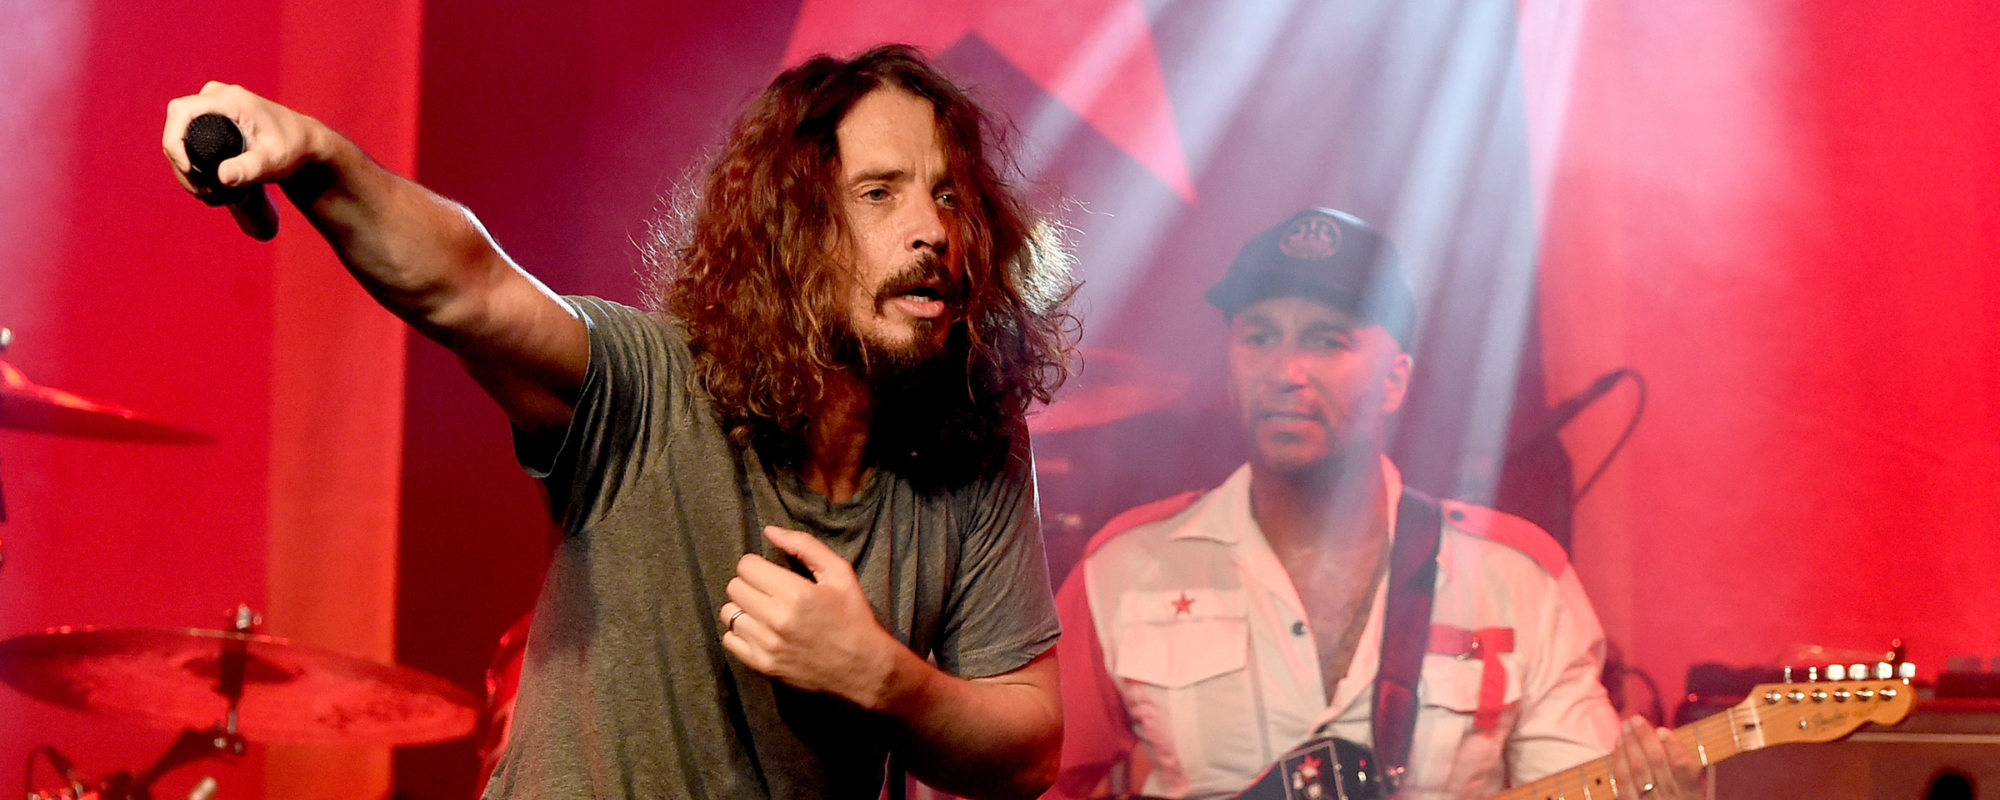 “Me Yelling at Me”: The Multi-Layered Meaning Behind Audioslave’s “Cochise”